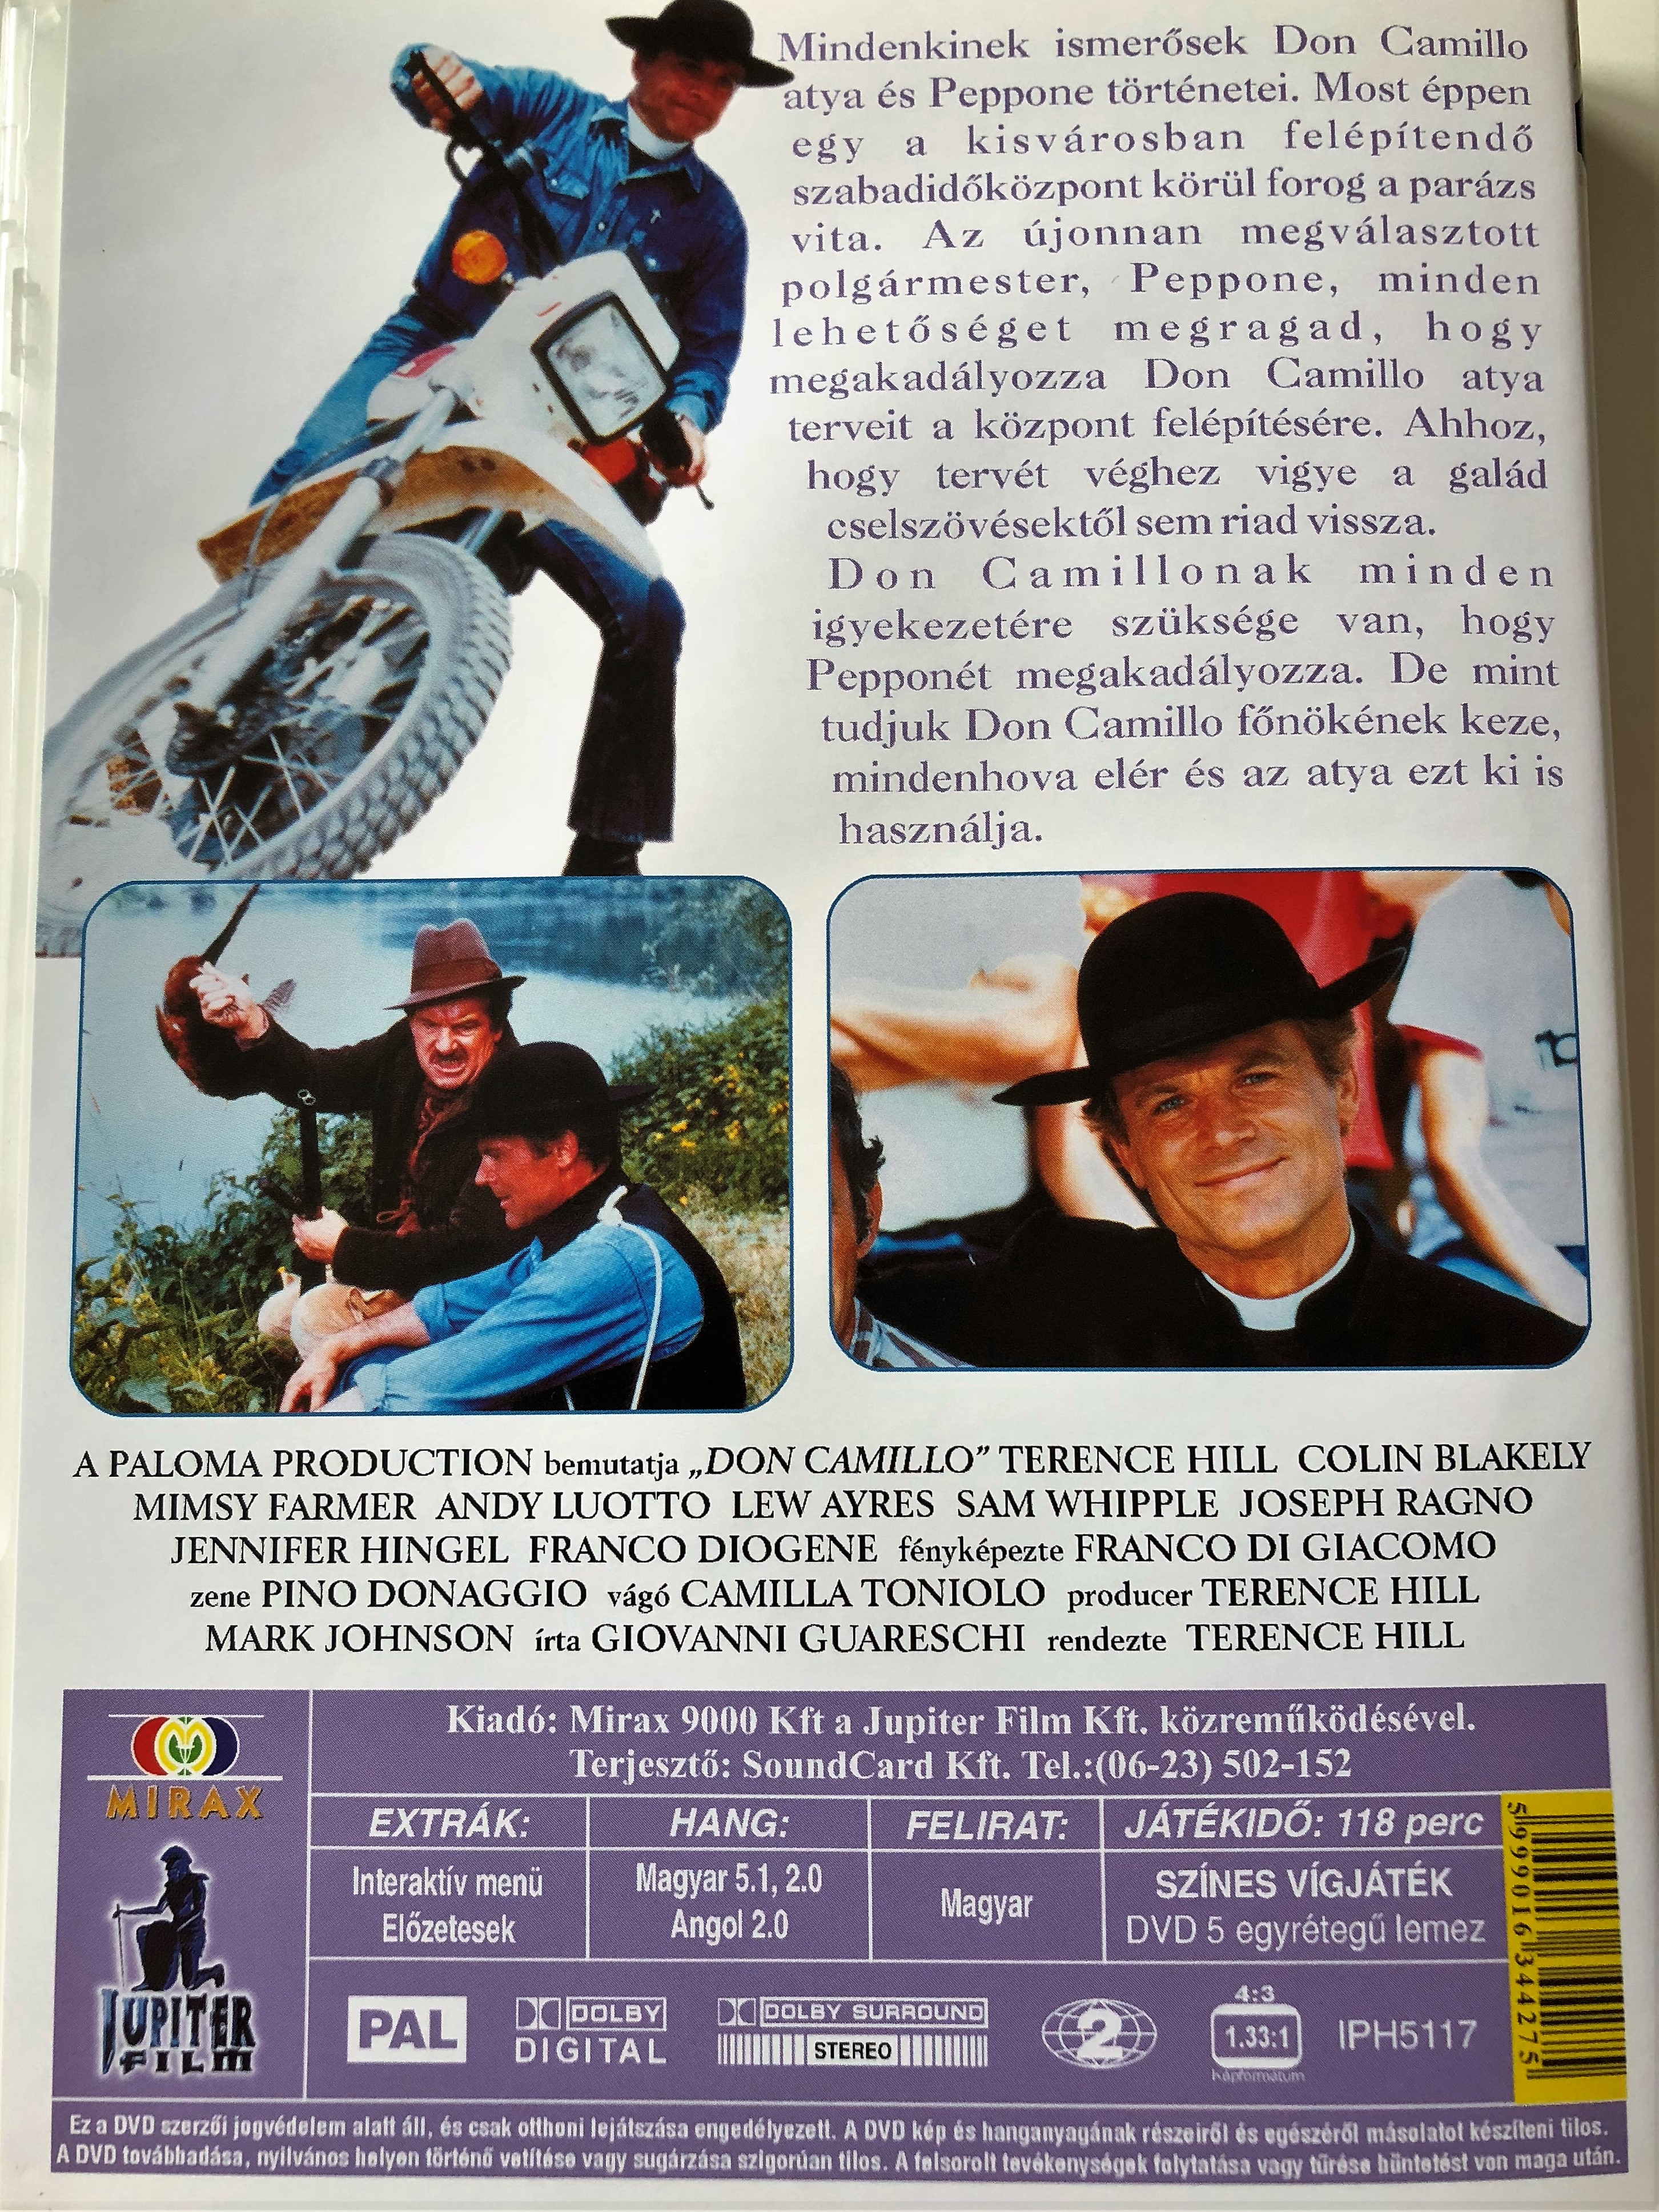 Don Camillo DVD 1983 / The World of Don Camillo / Audio: Hungarian and English / Subtitle: HUNGARIAN ONLY / Starring: Terence Hill and Colin Blakely / Directed by: Terence Hill bibleinmylanguage